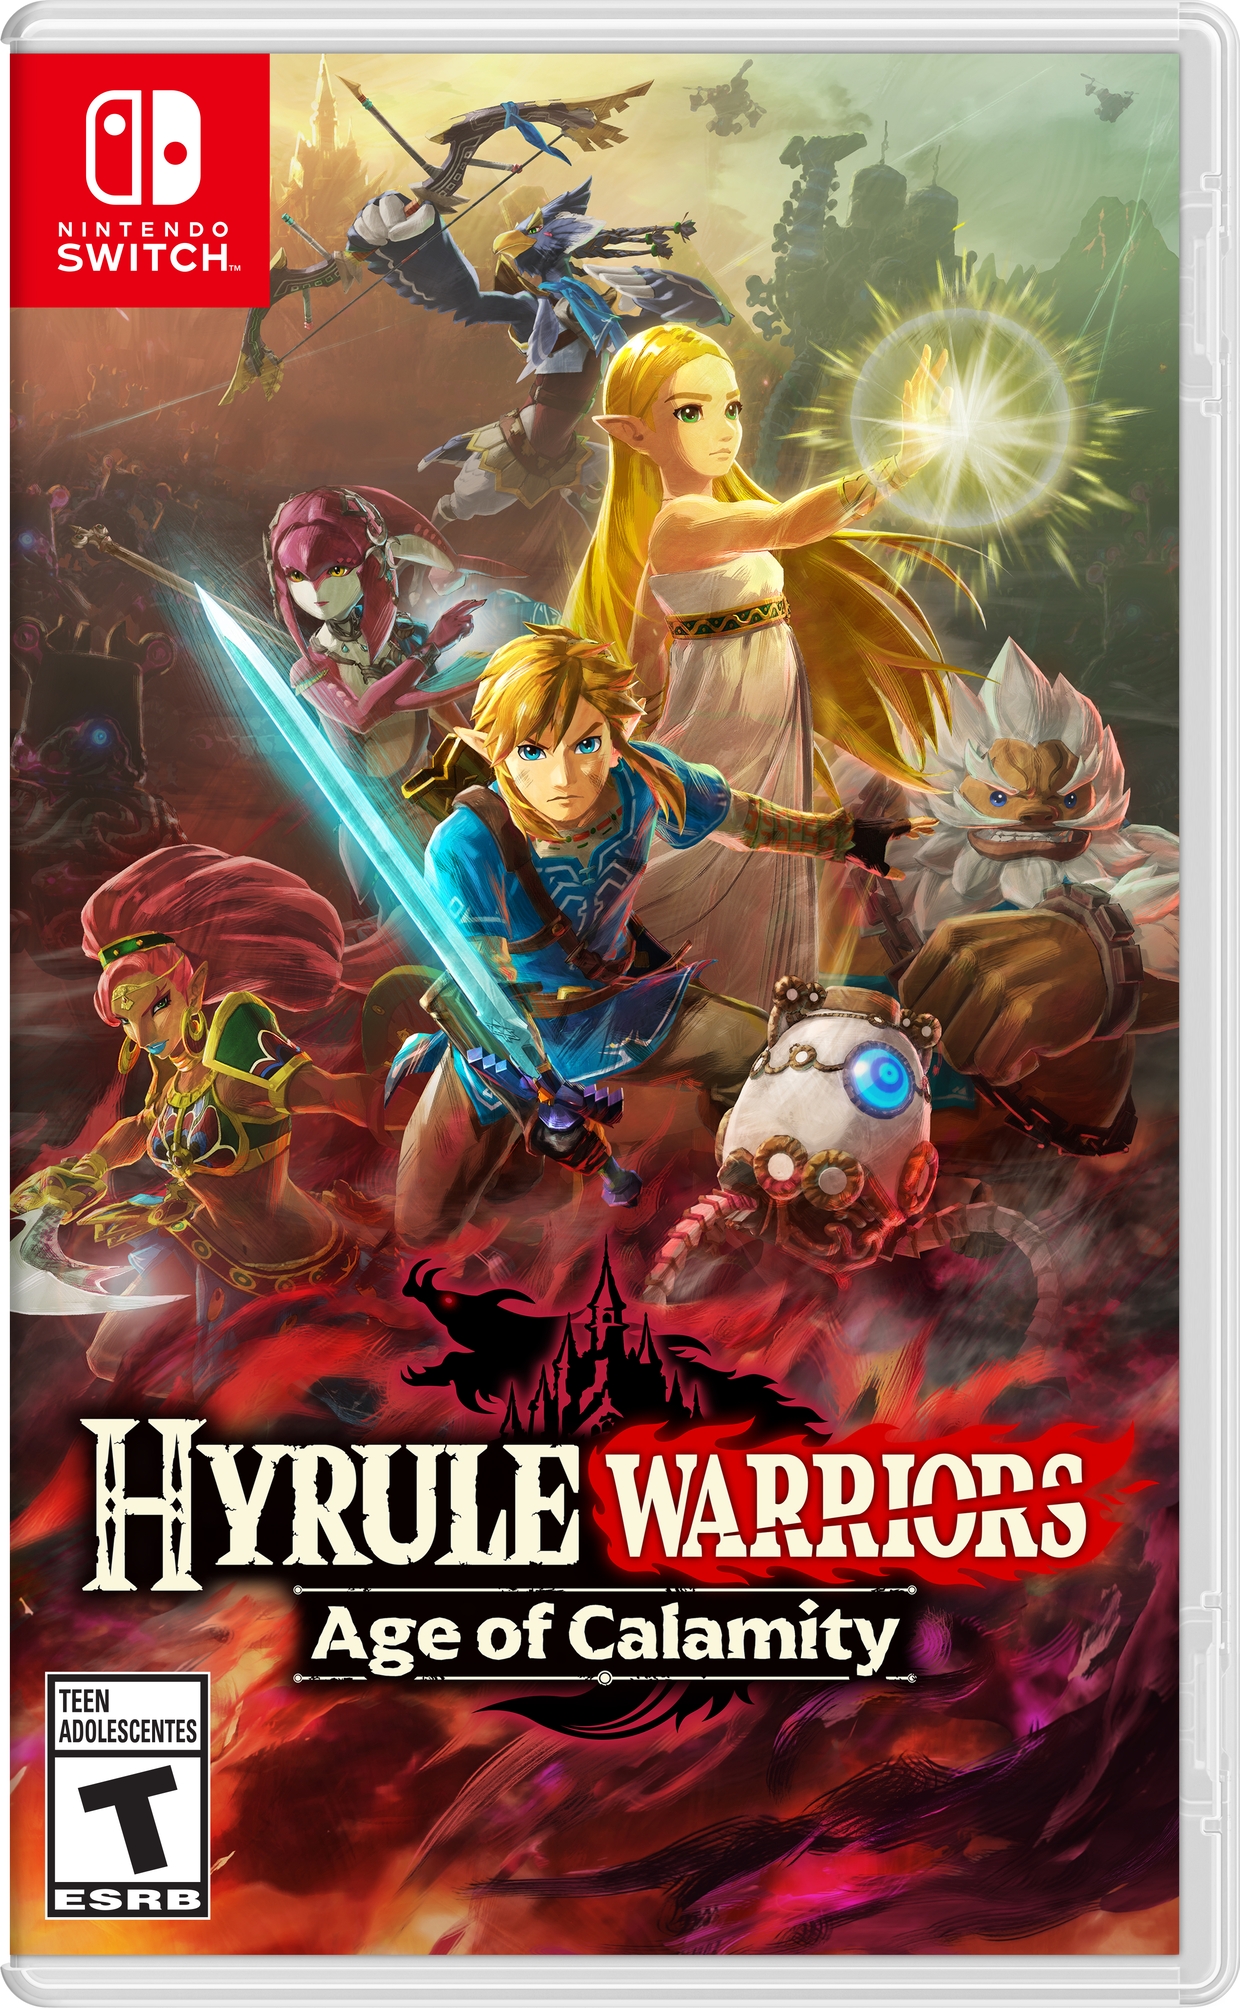 Nintendo Switch surprise as new Hyrule Warriors game based on Breath of the  Wild revealed, Gaming, Entertainment